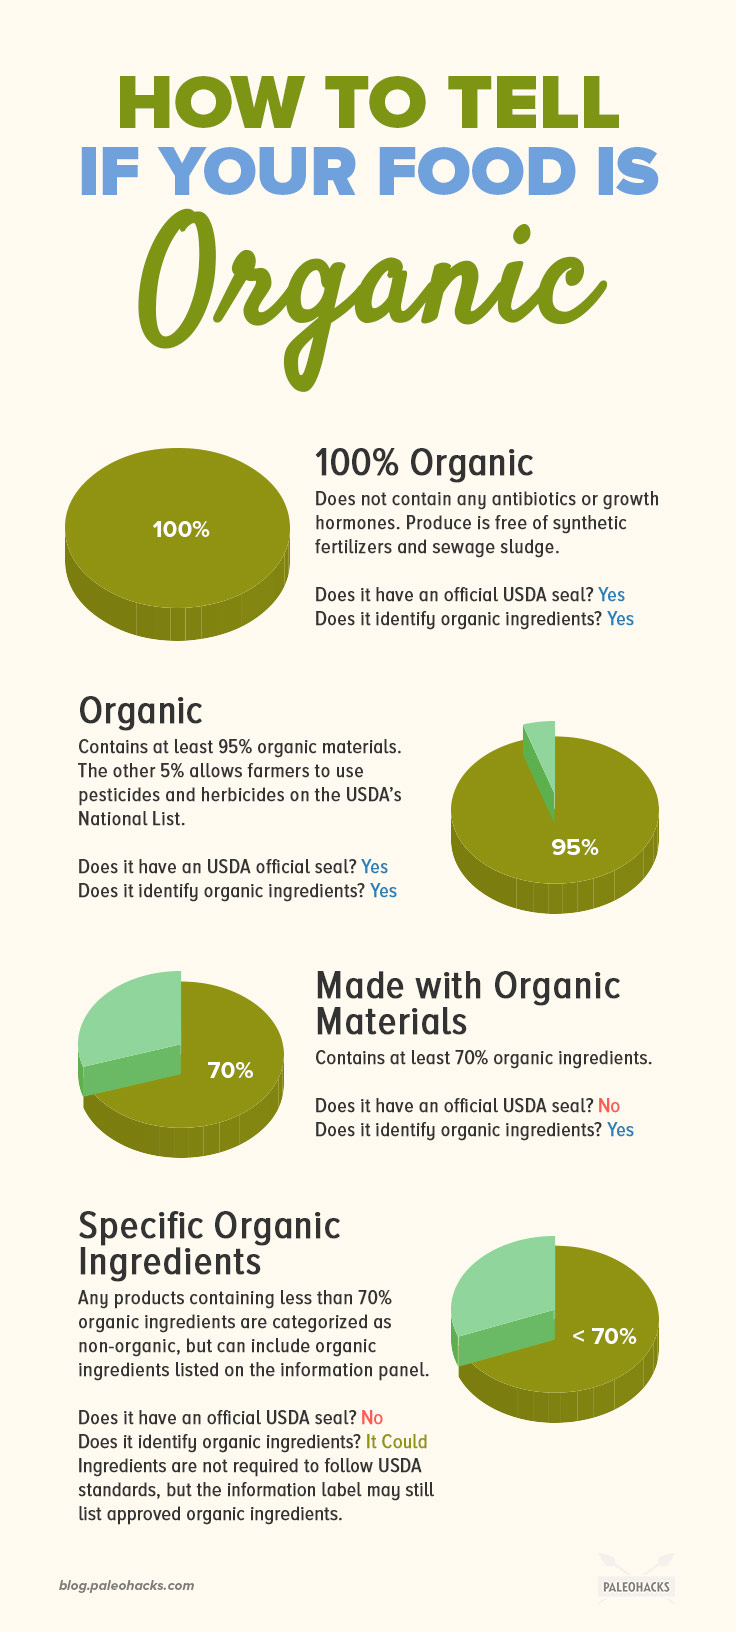 Is it worth it to go organic? Here’s what you need to know about reading organic labels, and what it means for your health.